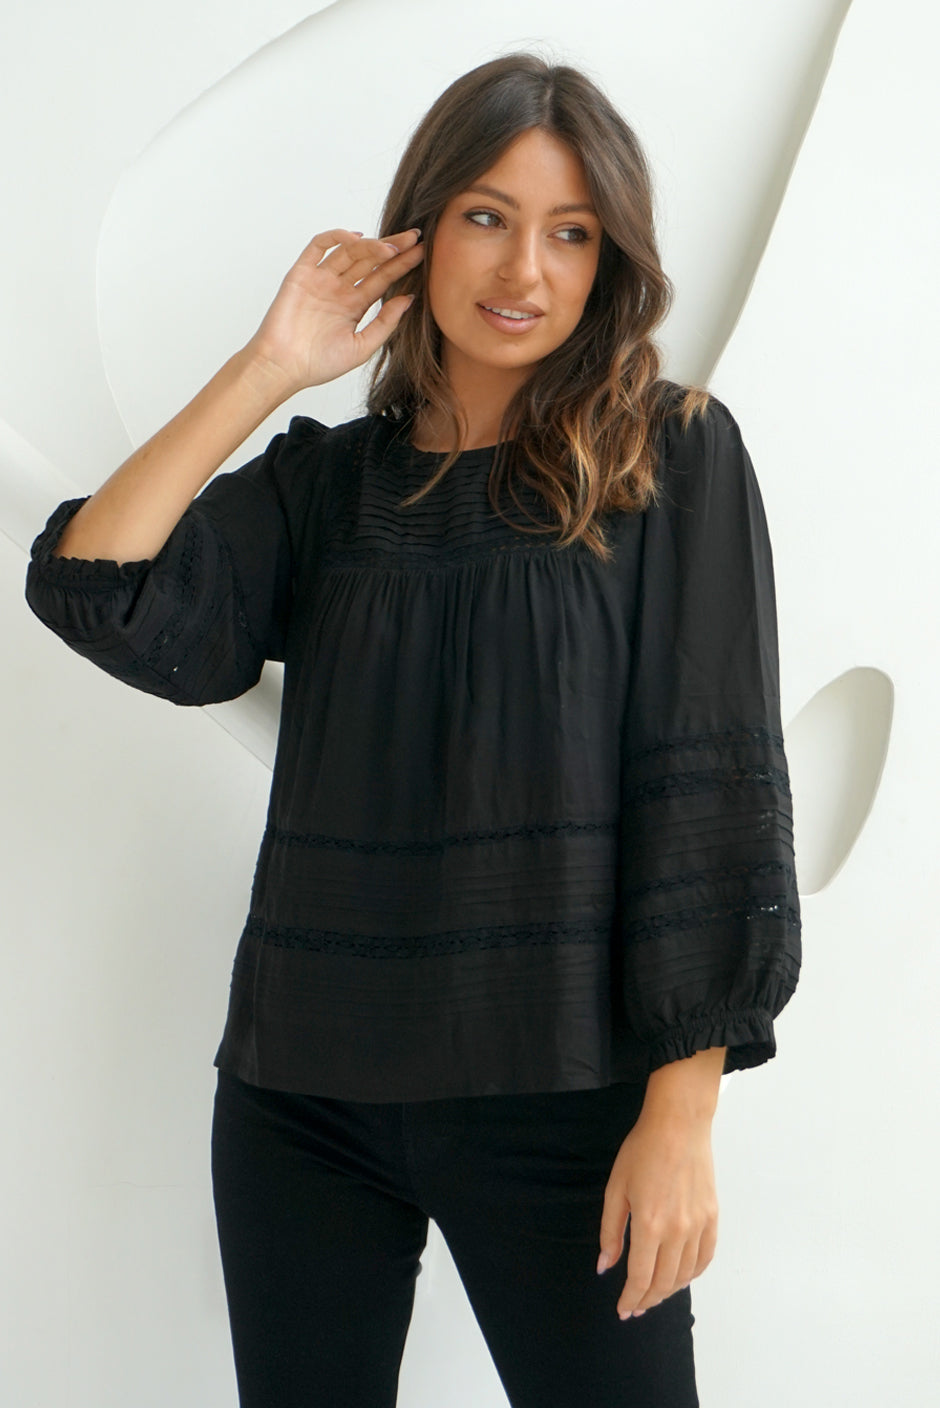 Sustainable & Ethical Women's Tops in Luxurious Fabrics - Paneros Clothing